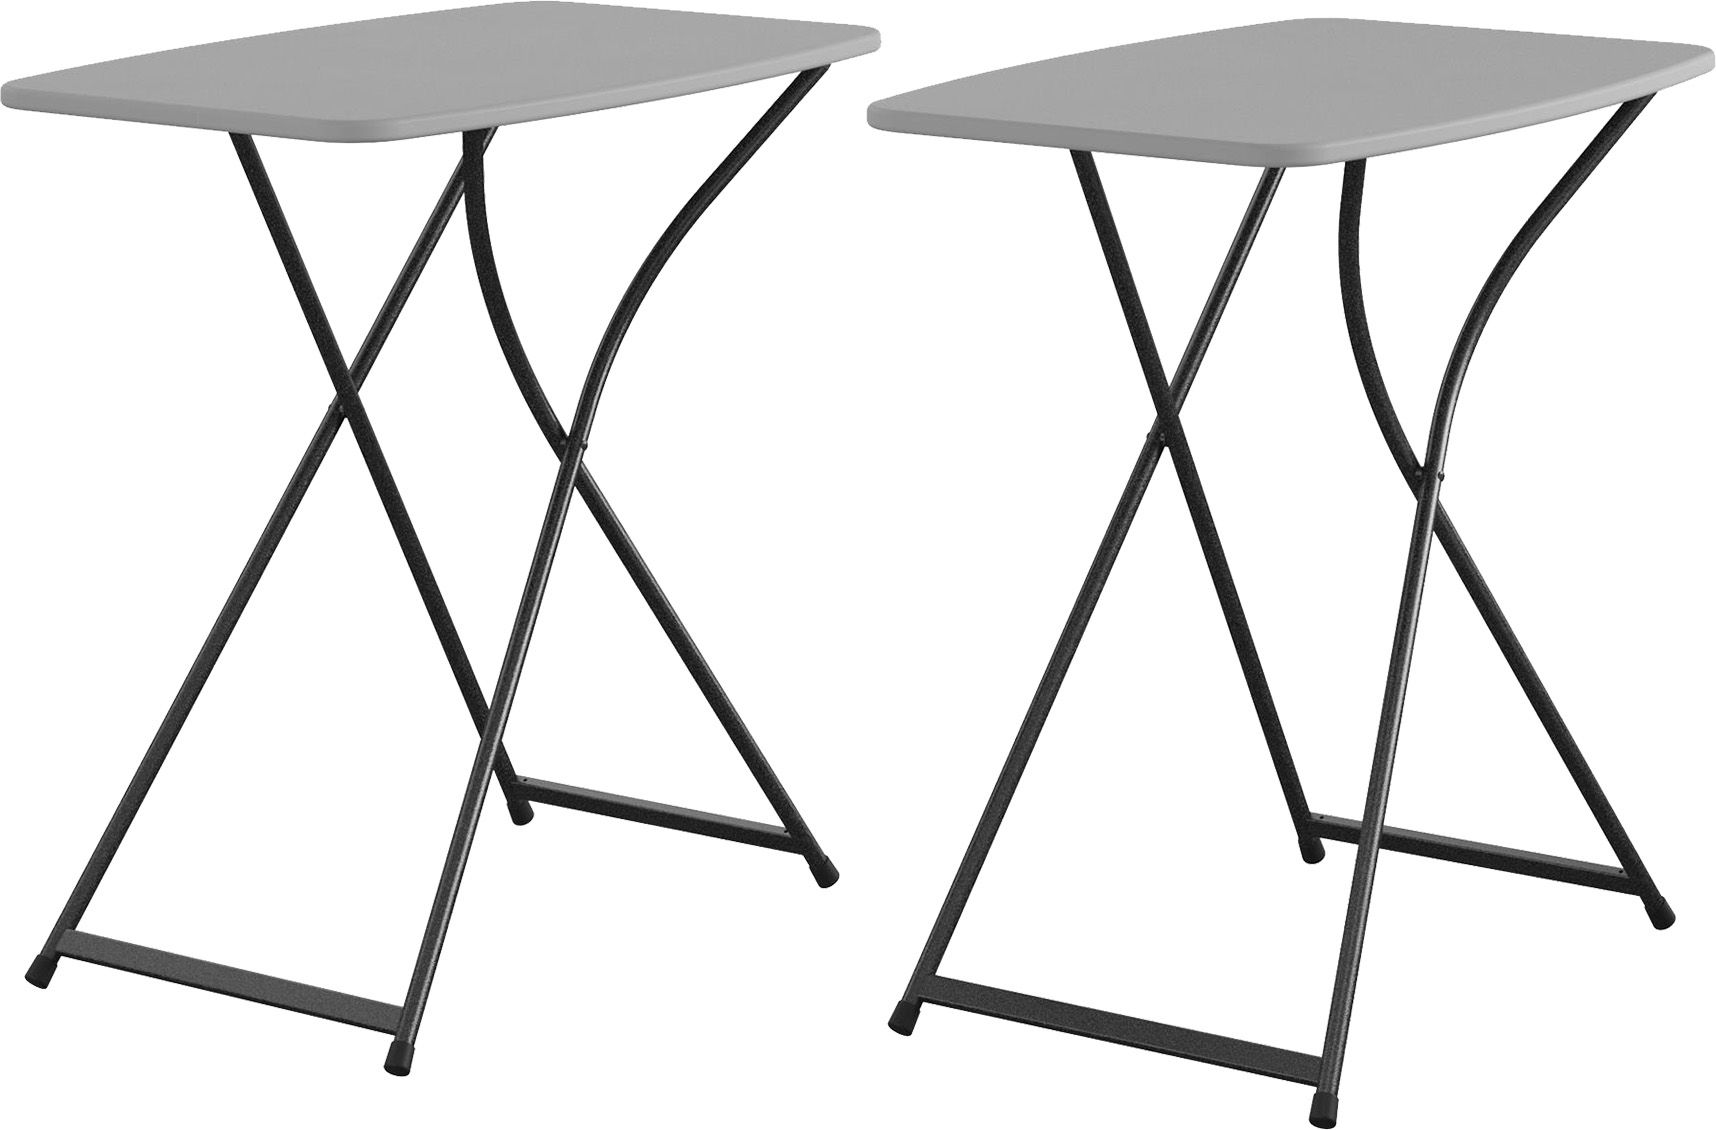 Photos - Mount/Stand Cosco Personal Folding Activity Table 2-Pack, Gray 23UQWUPRSNLCTVTYTREC 